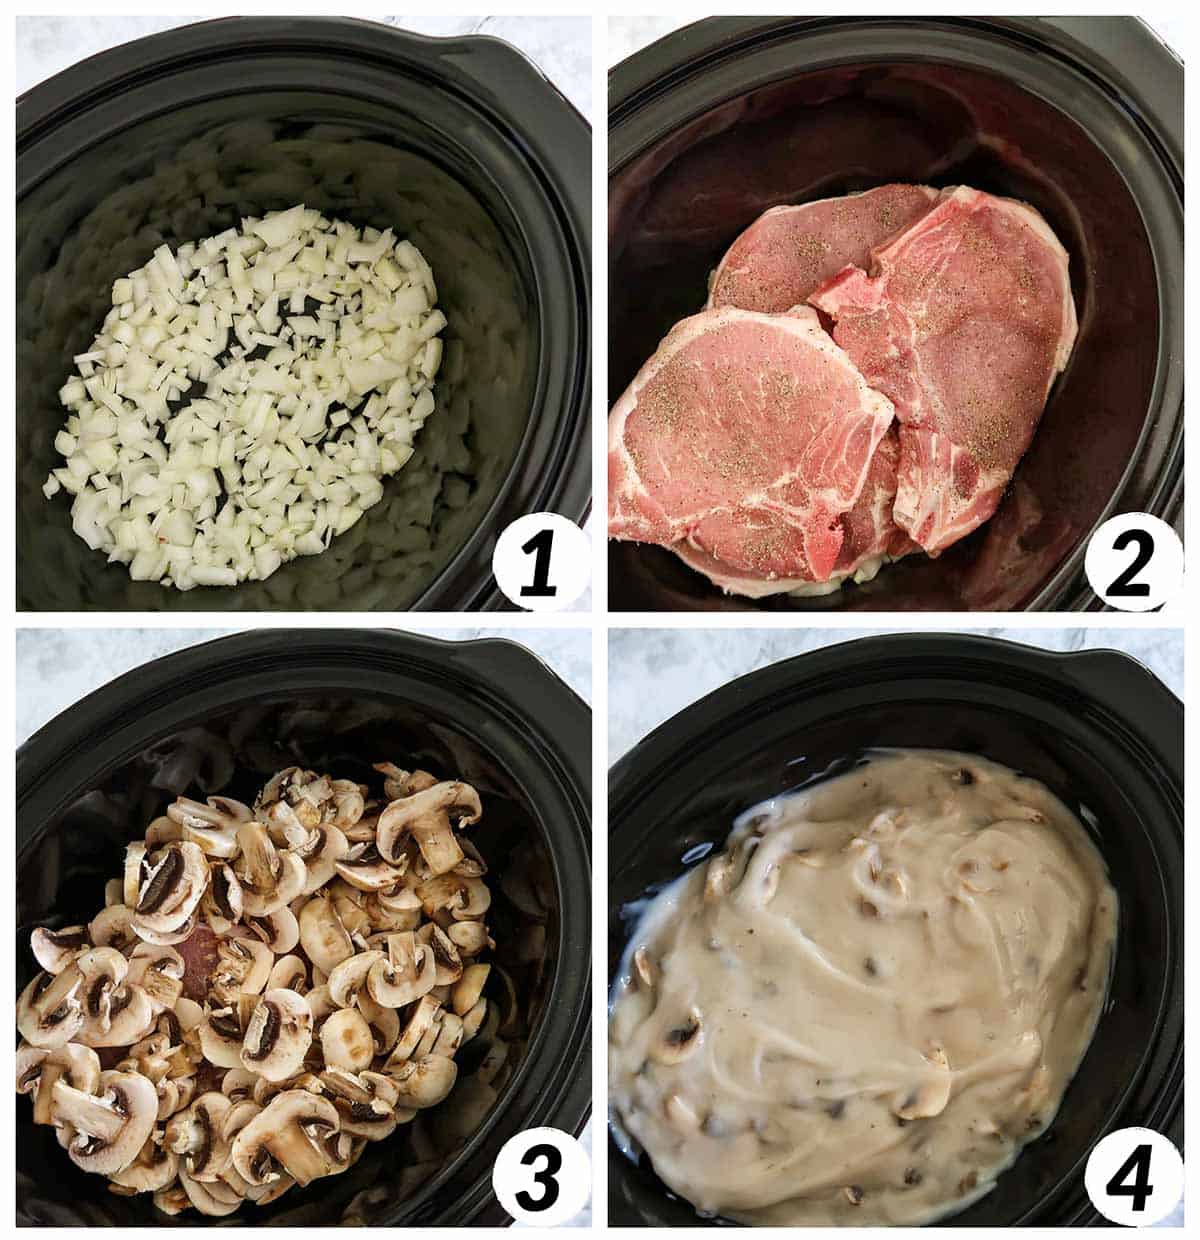 Four panel grid of process shots - combining ingredients in the crock pot and cooking.